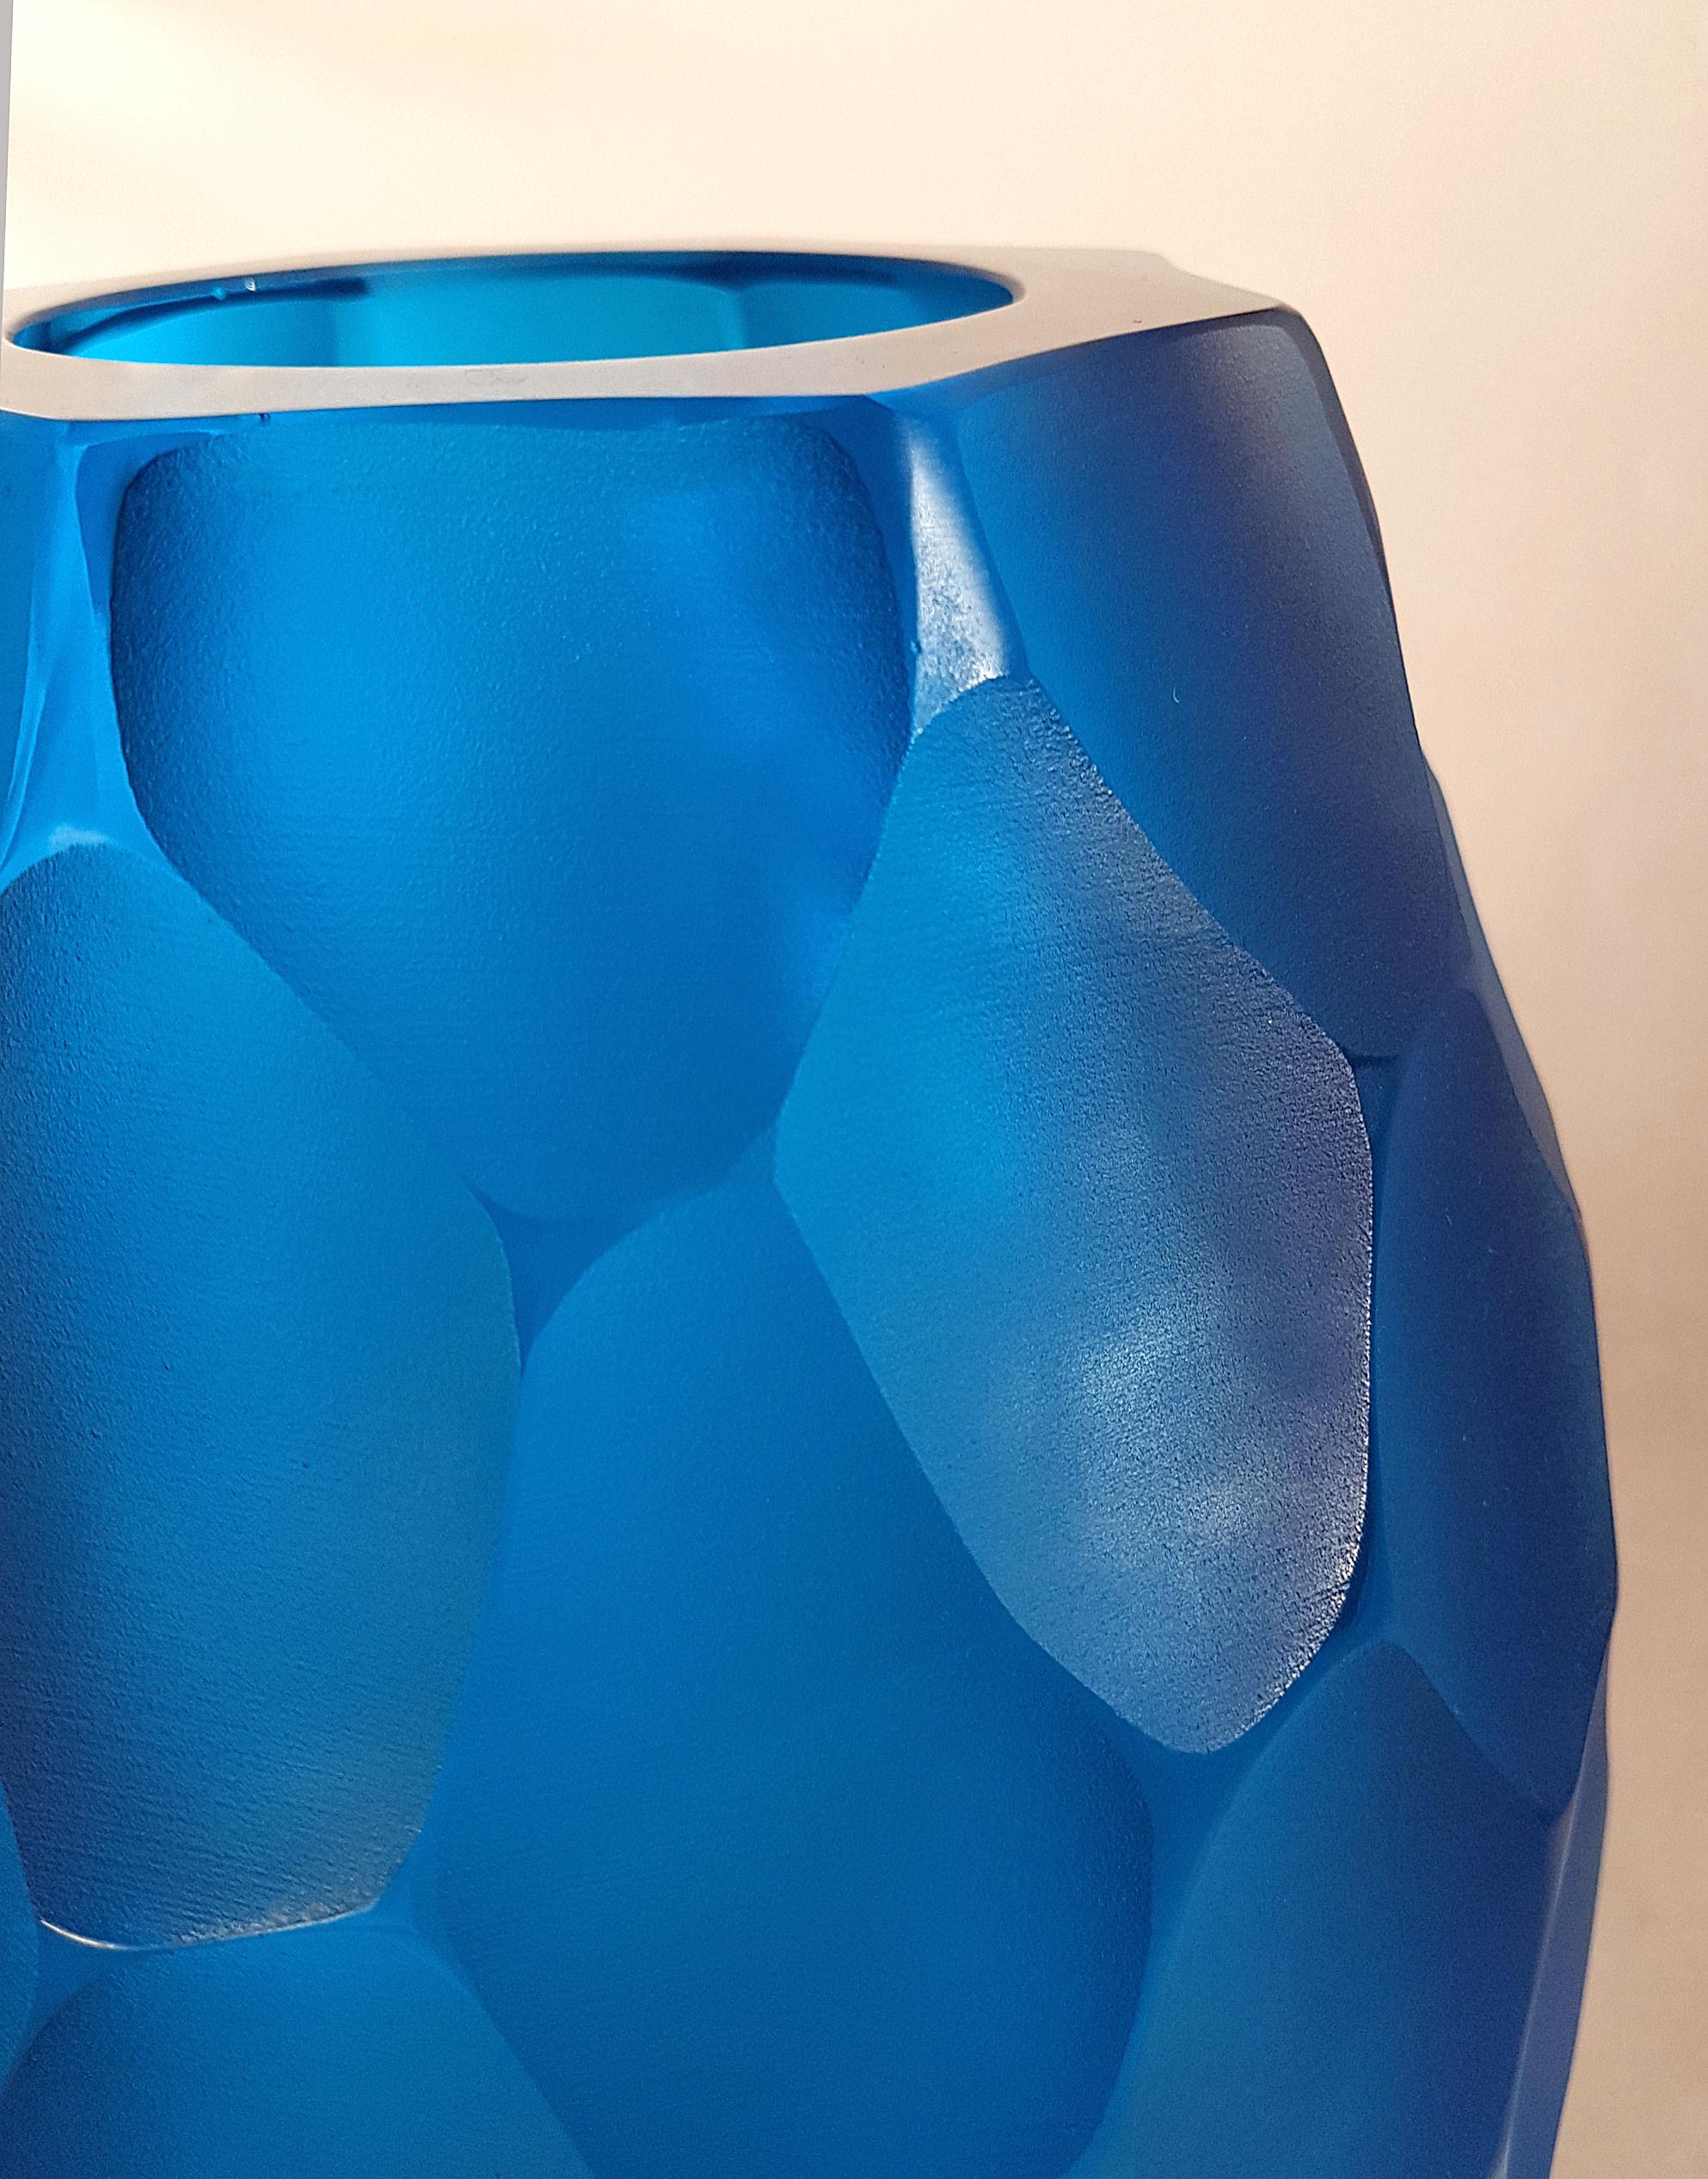 Large Mid-Century Modern Blue Faceted Murano Glass Vase by Simone Cenedese Italy 1